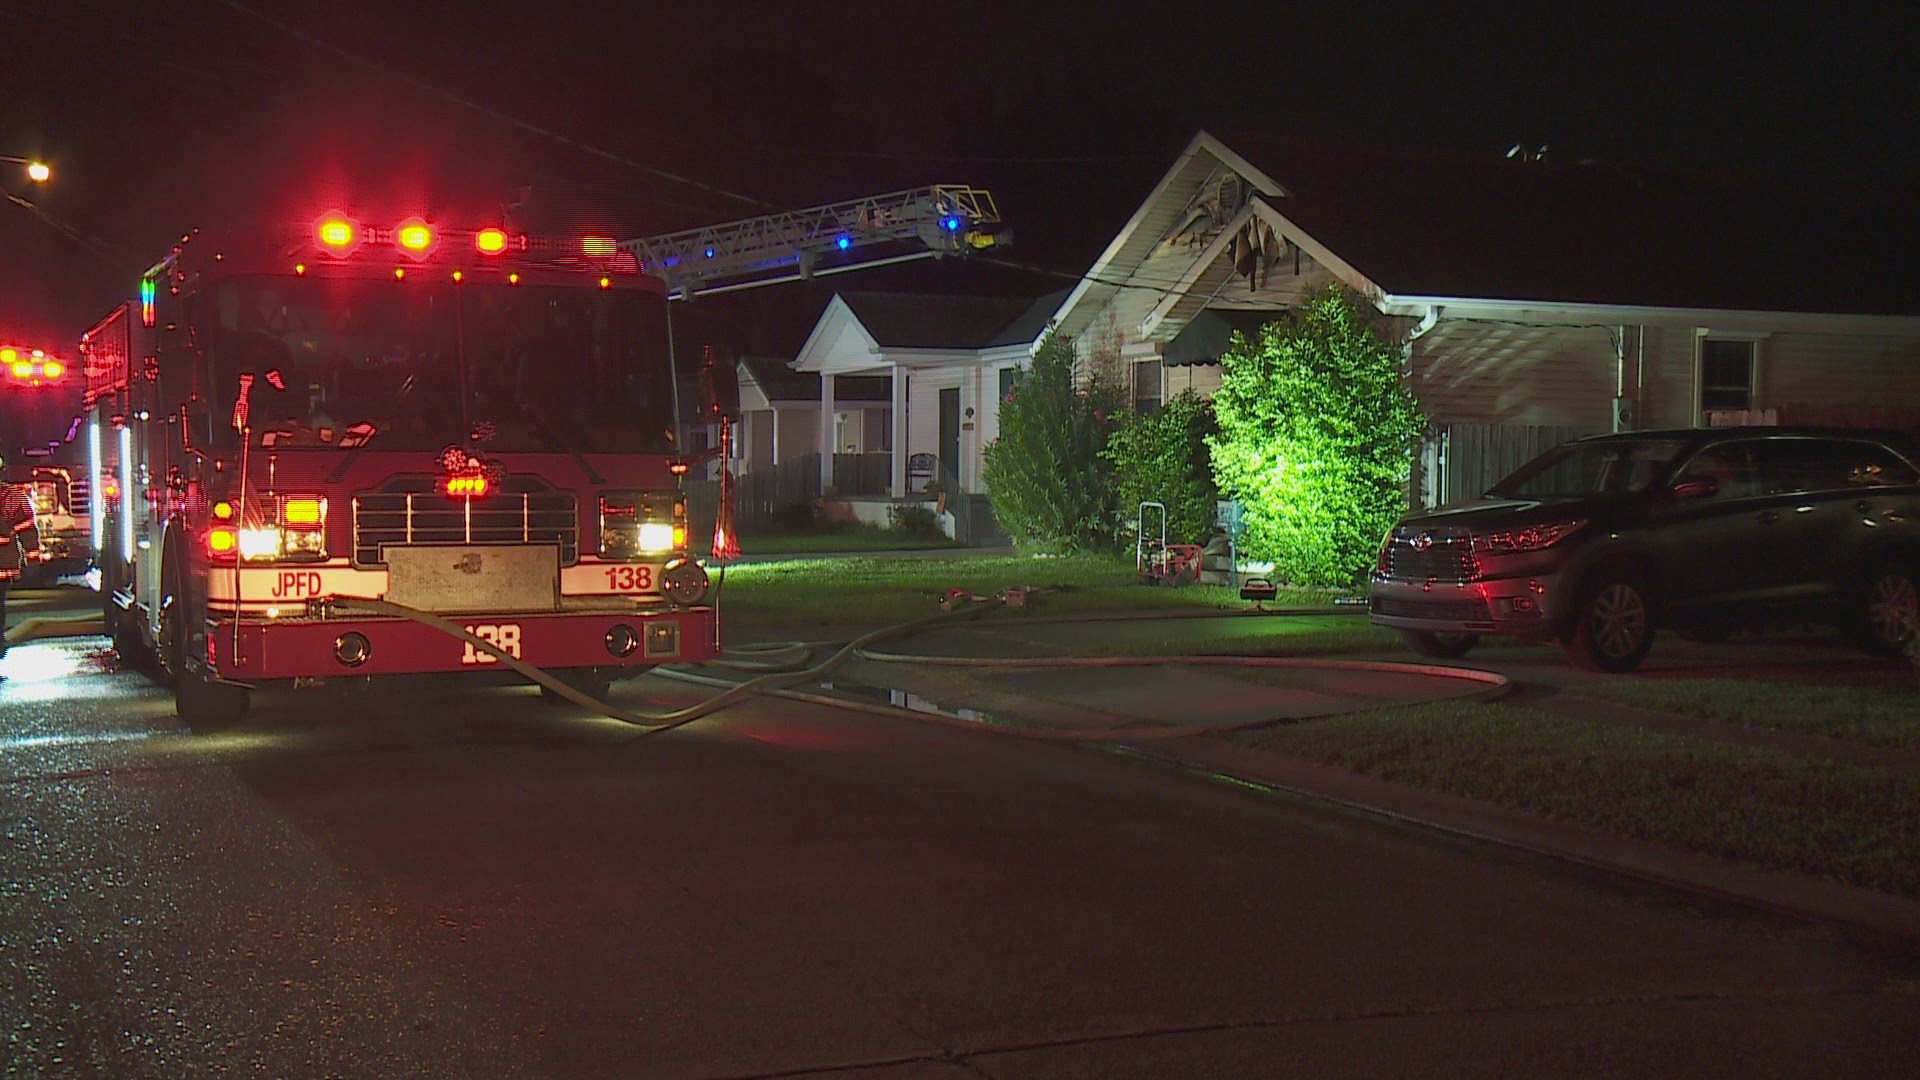 The home was occupied at the time of the fire and residents were able to evacuate in time